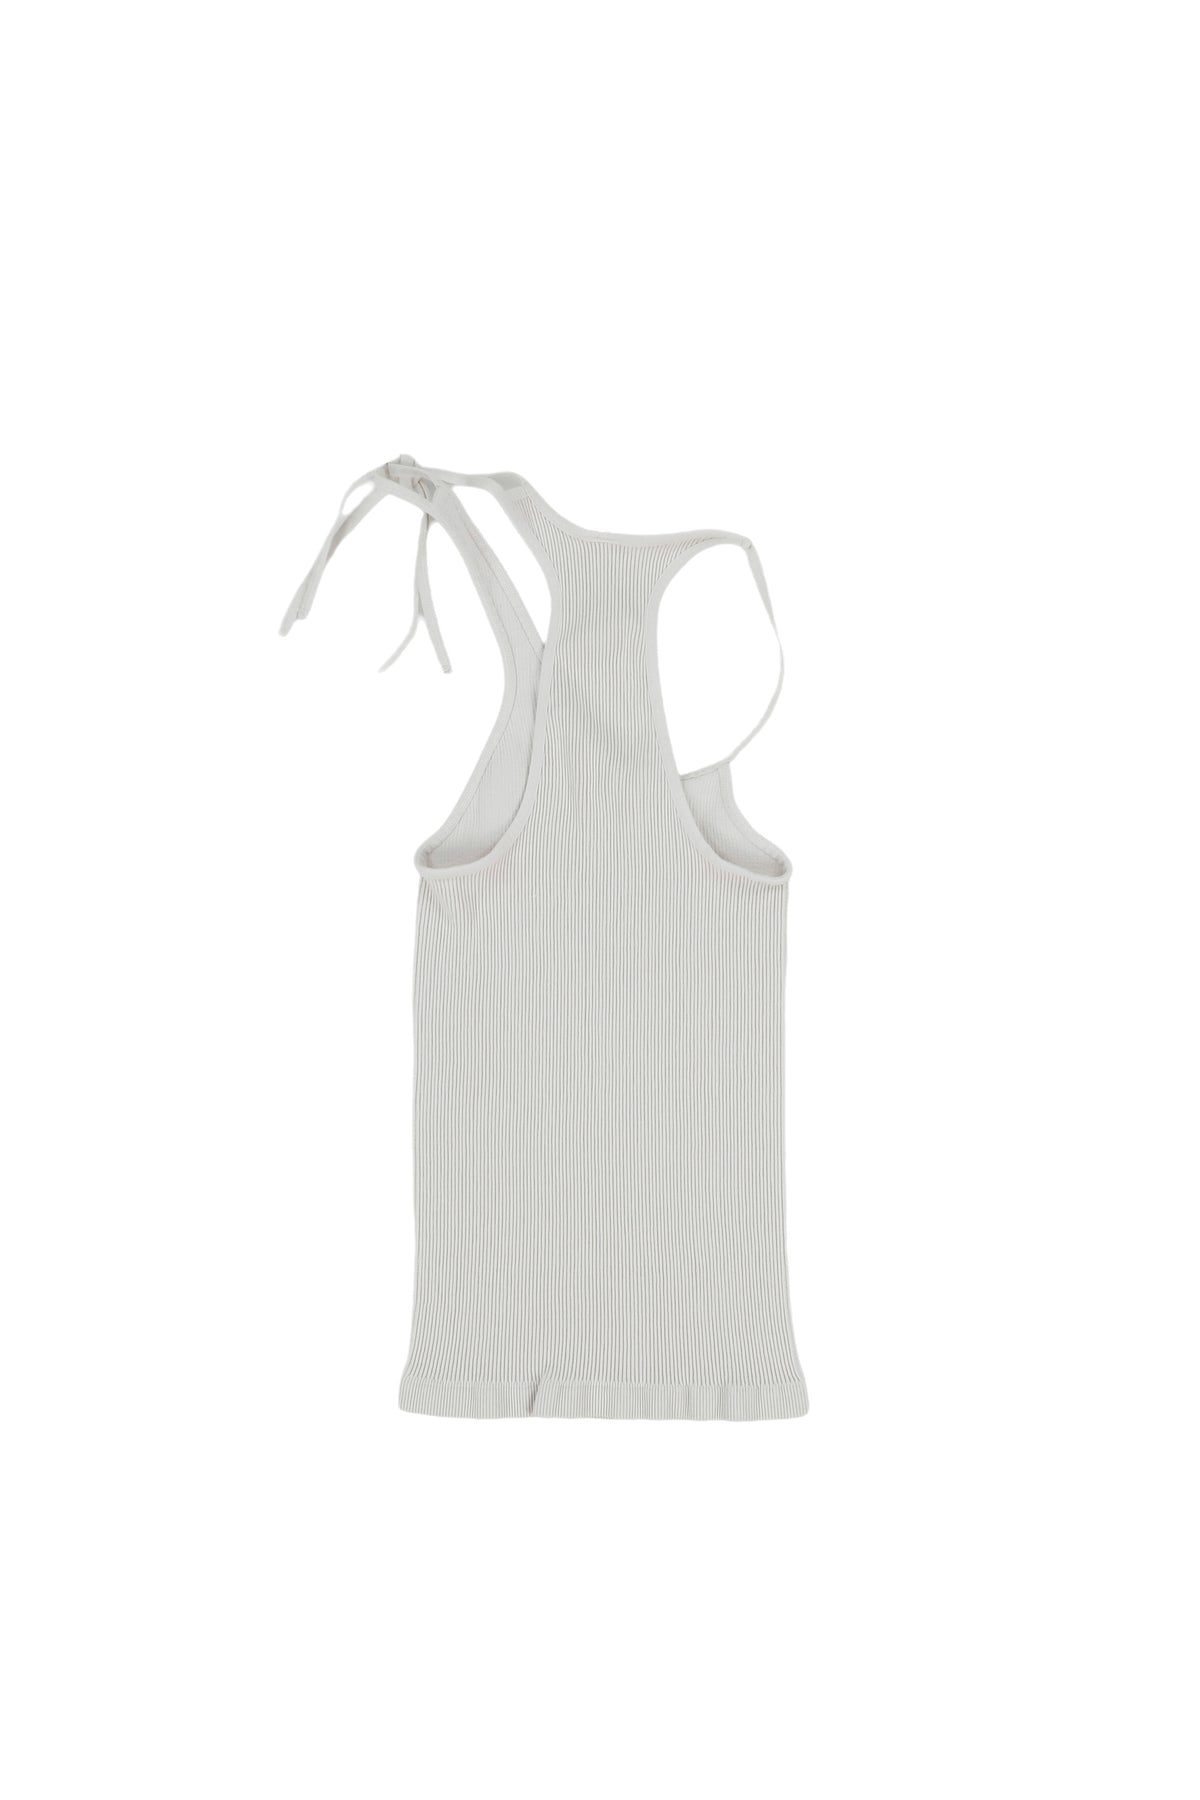 RIBBED JERSEY TANK TOP / IVR